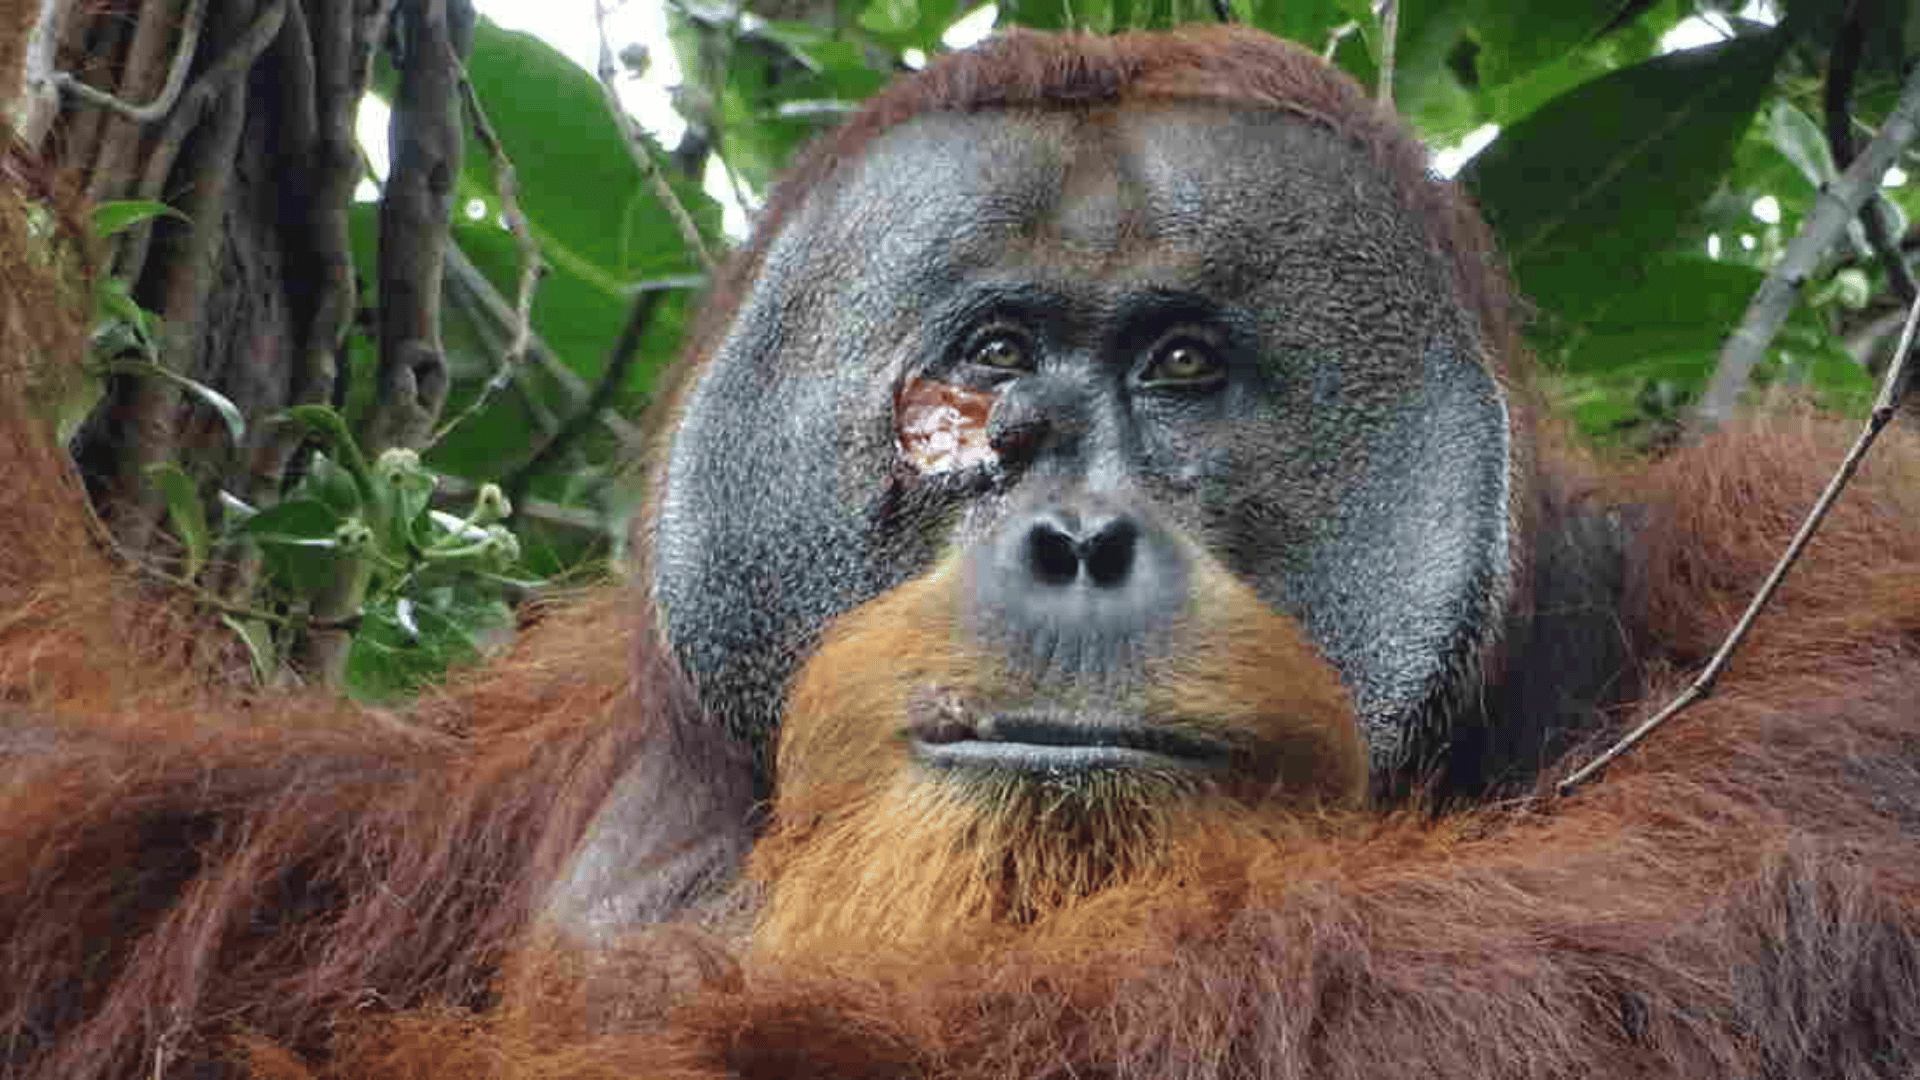 Researchers in a rainforest in Indonesia spotted an injury on the face of a male orangutan they named Rakus Armas:Suaq Project